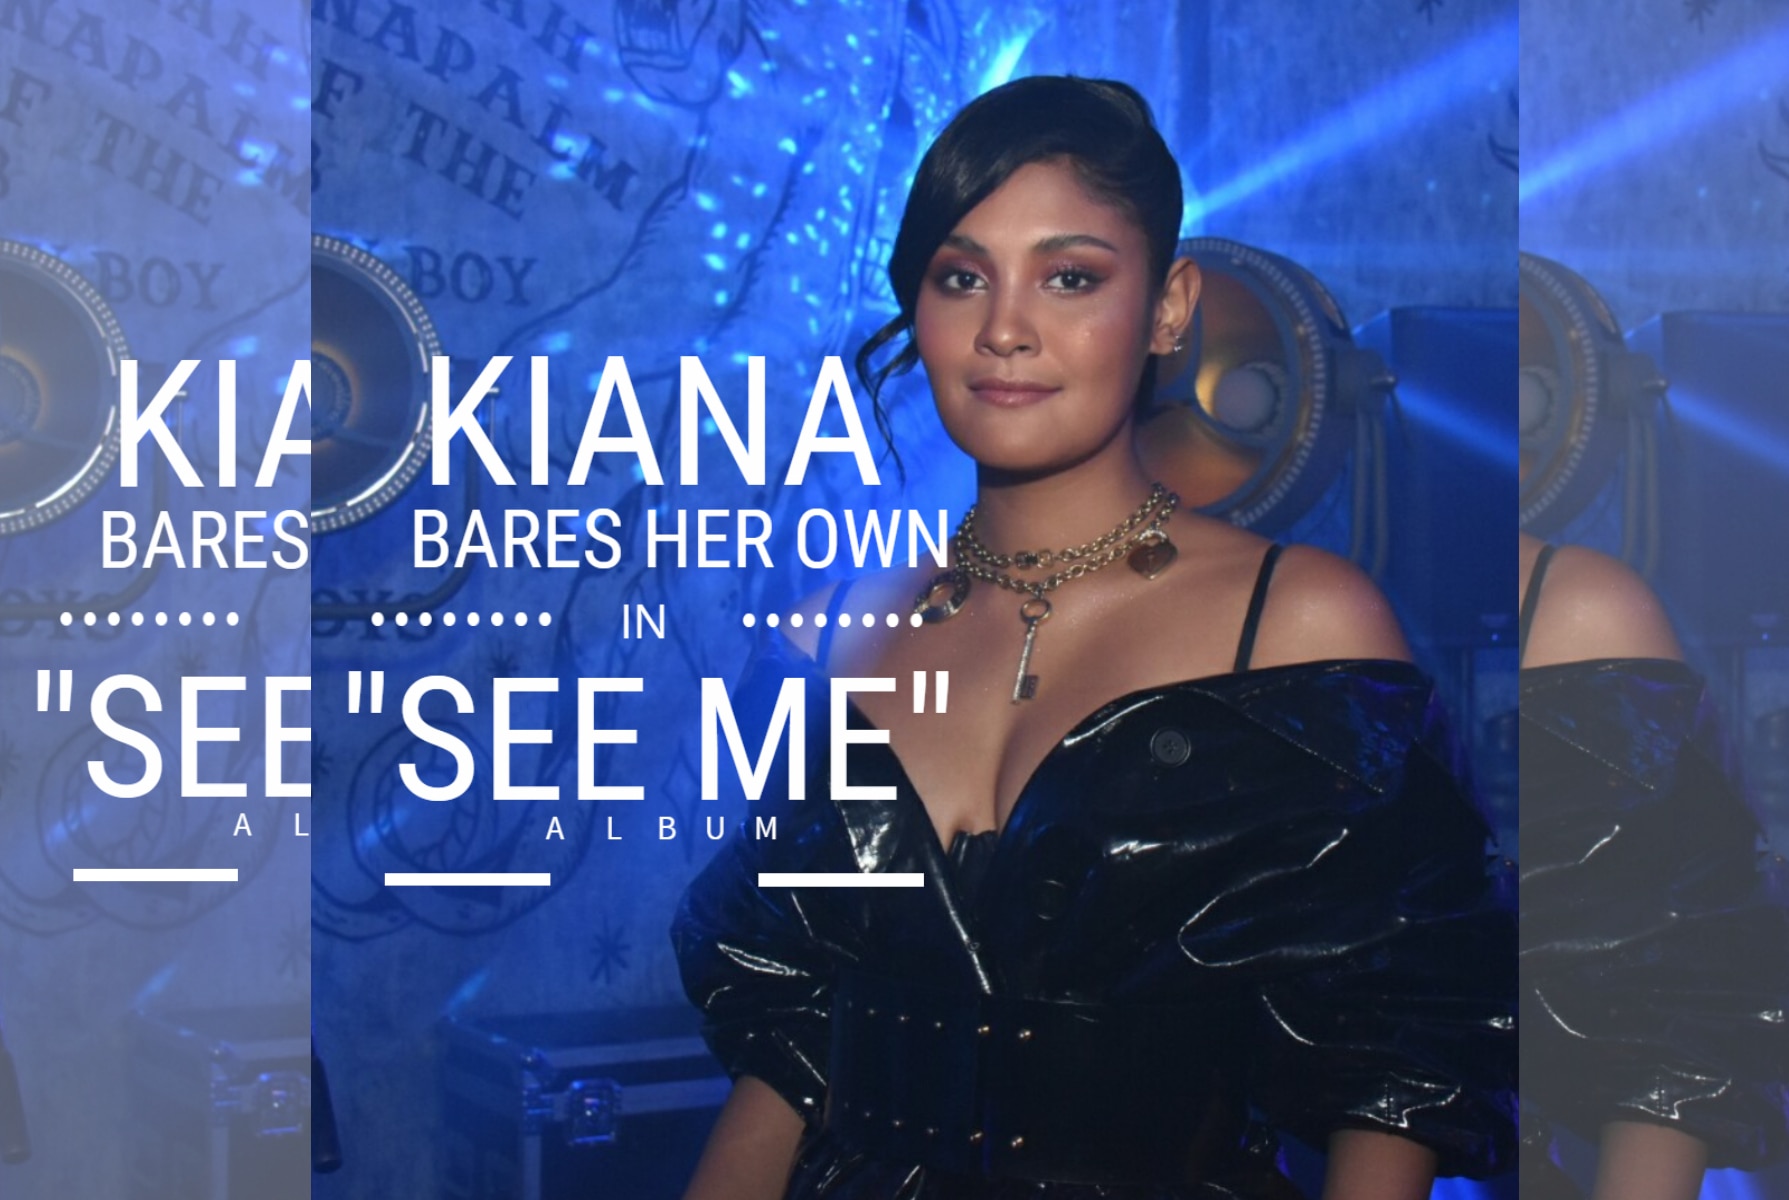 Kiana bares her own in "See Me" album